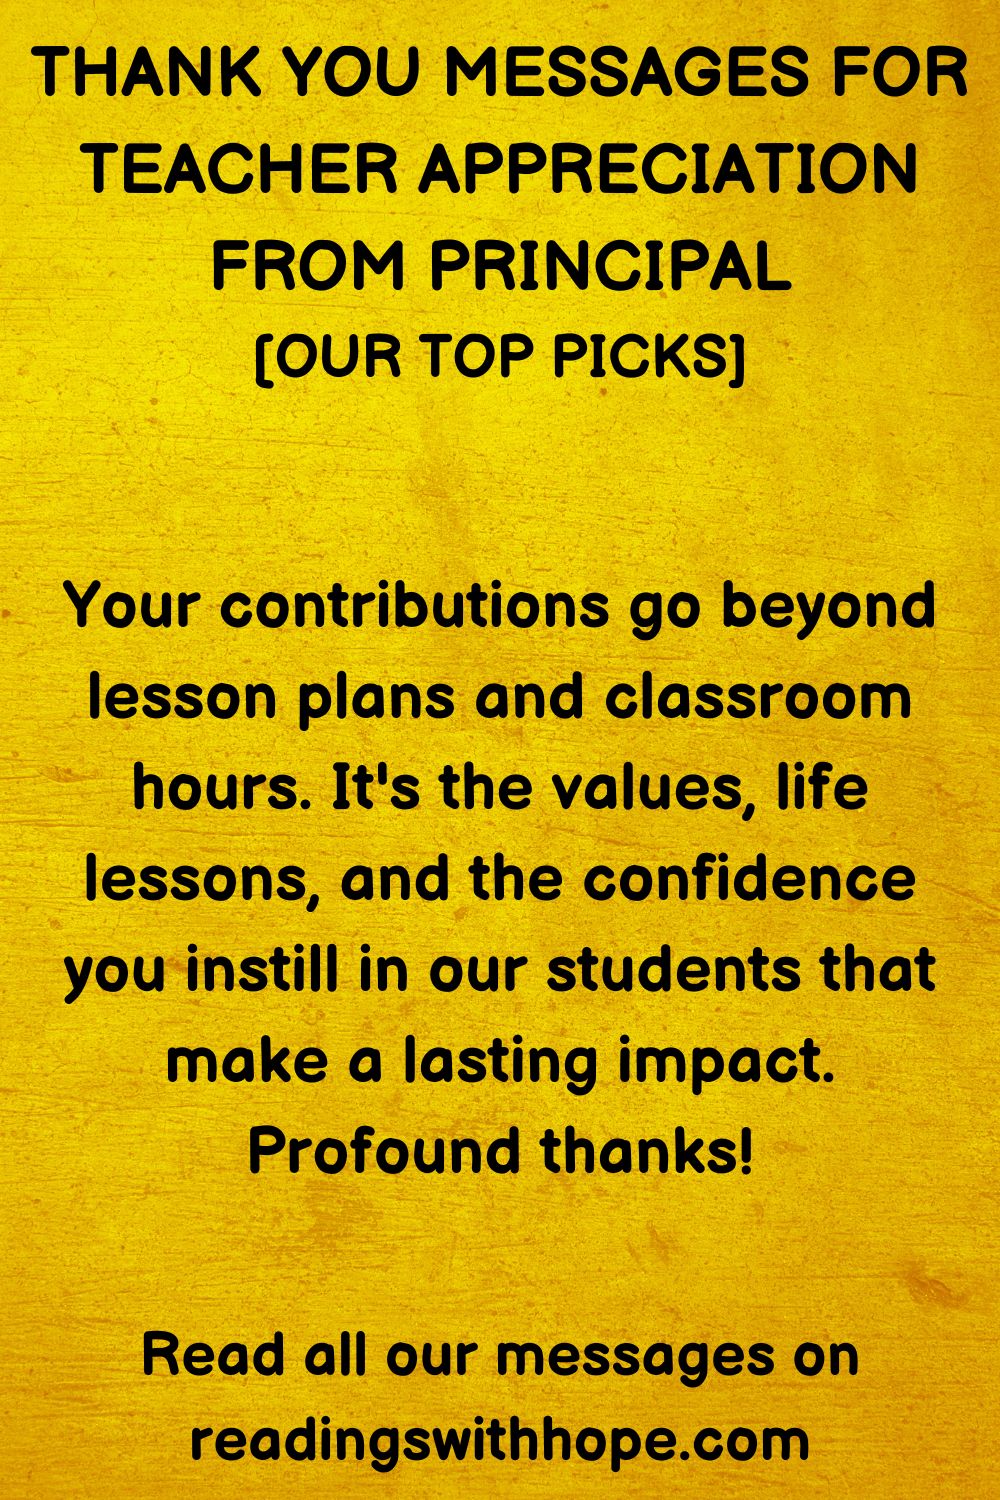 Thank You Message For Teacher Appreciation From Principal
